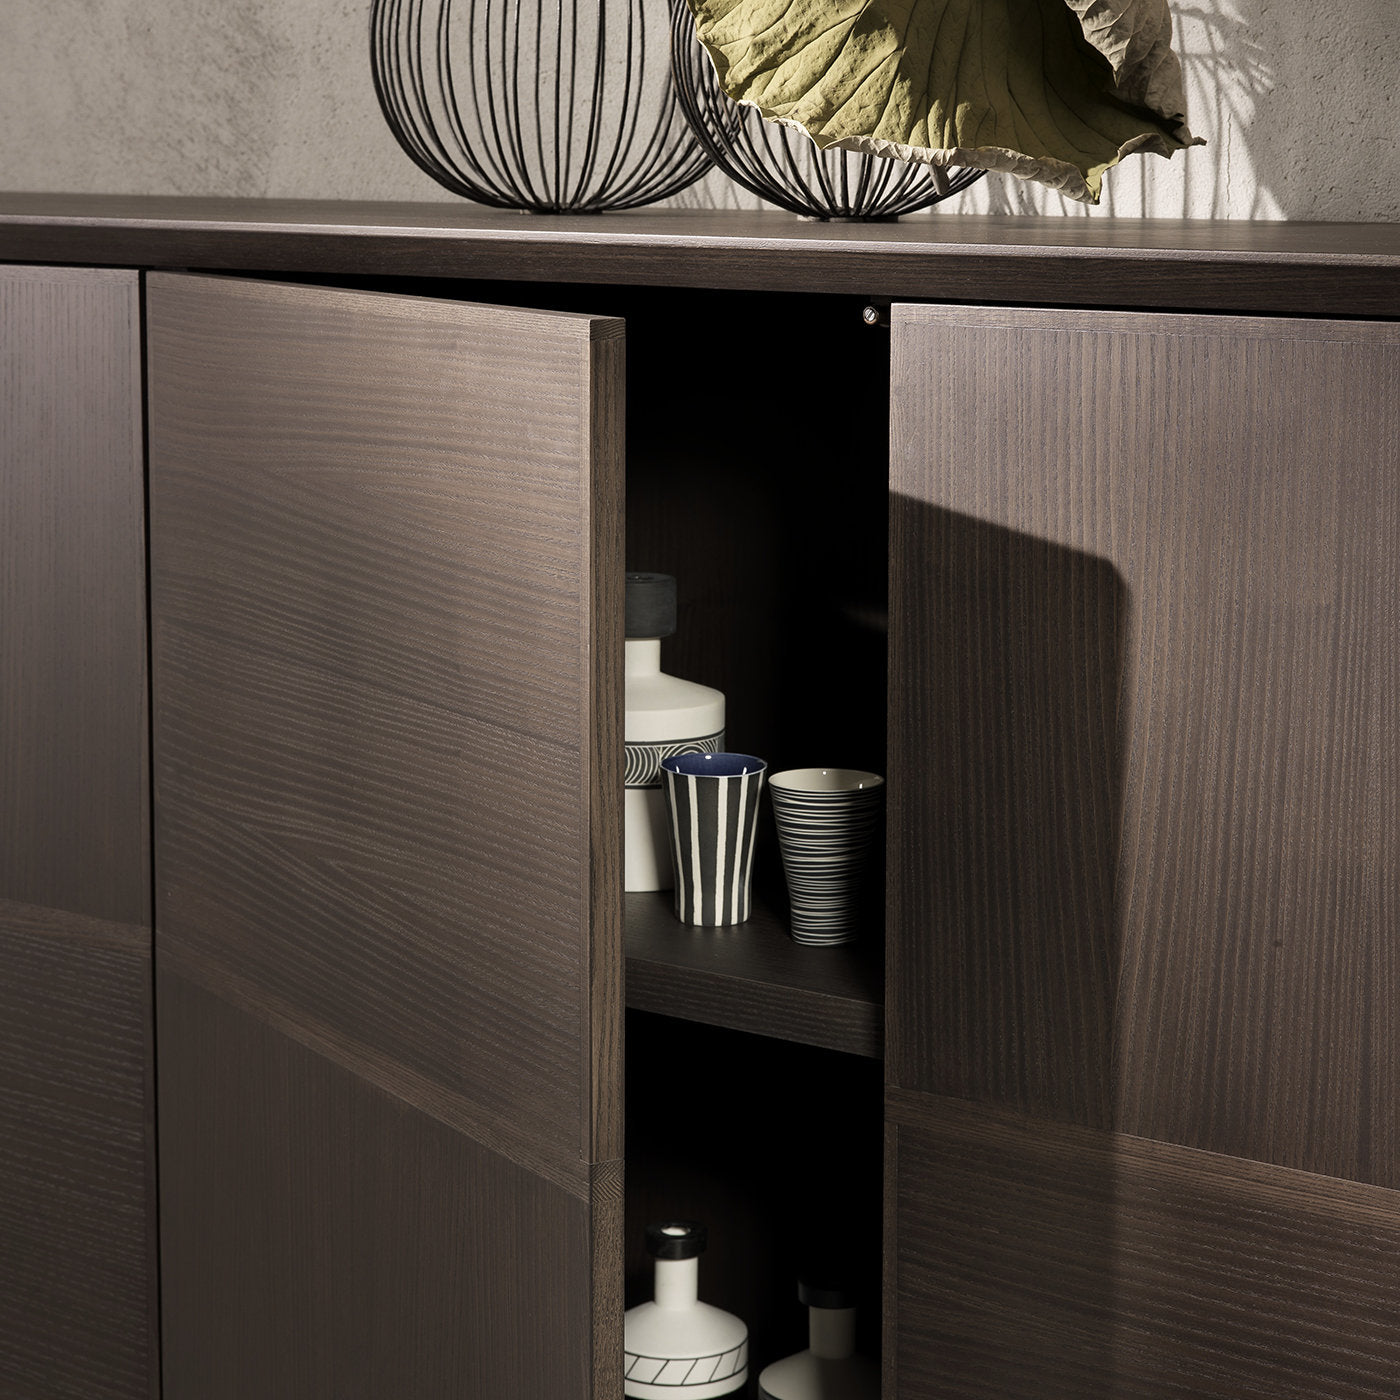 Flair Sideboard by Giuliano Cappelletti - Alternative view 3